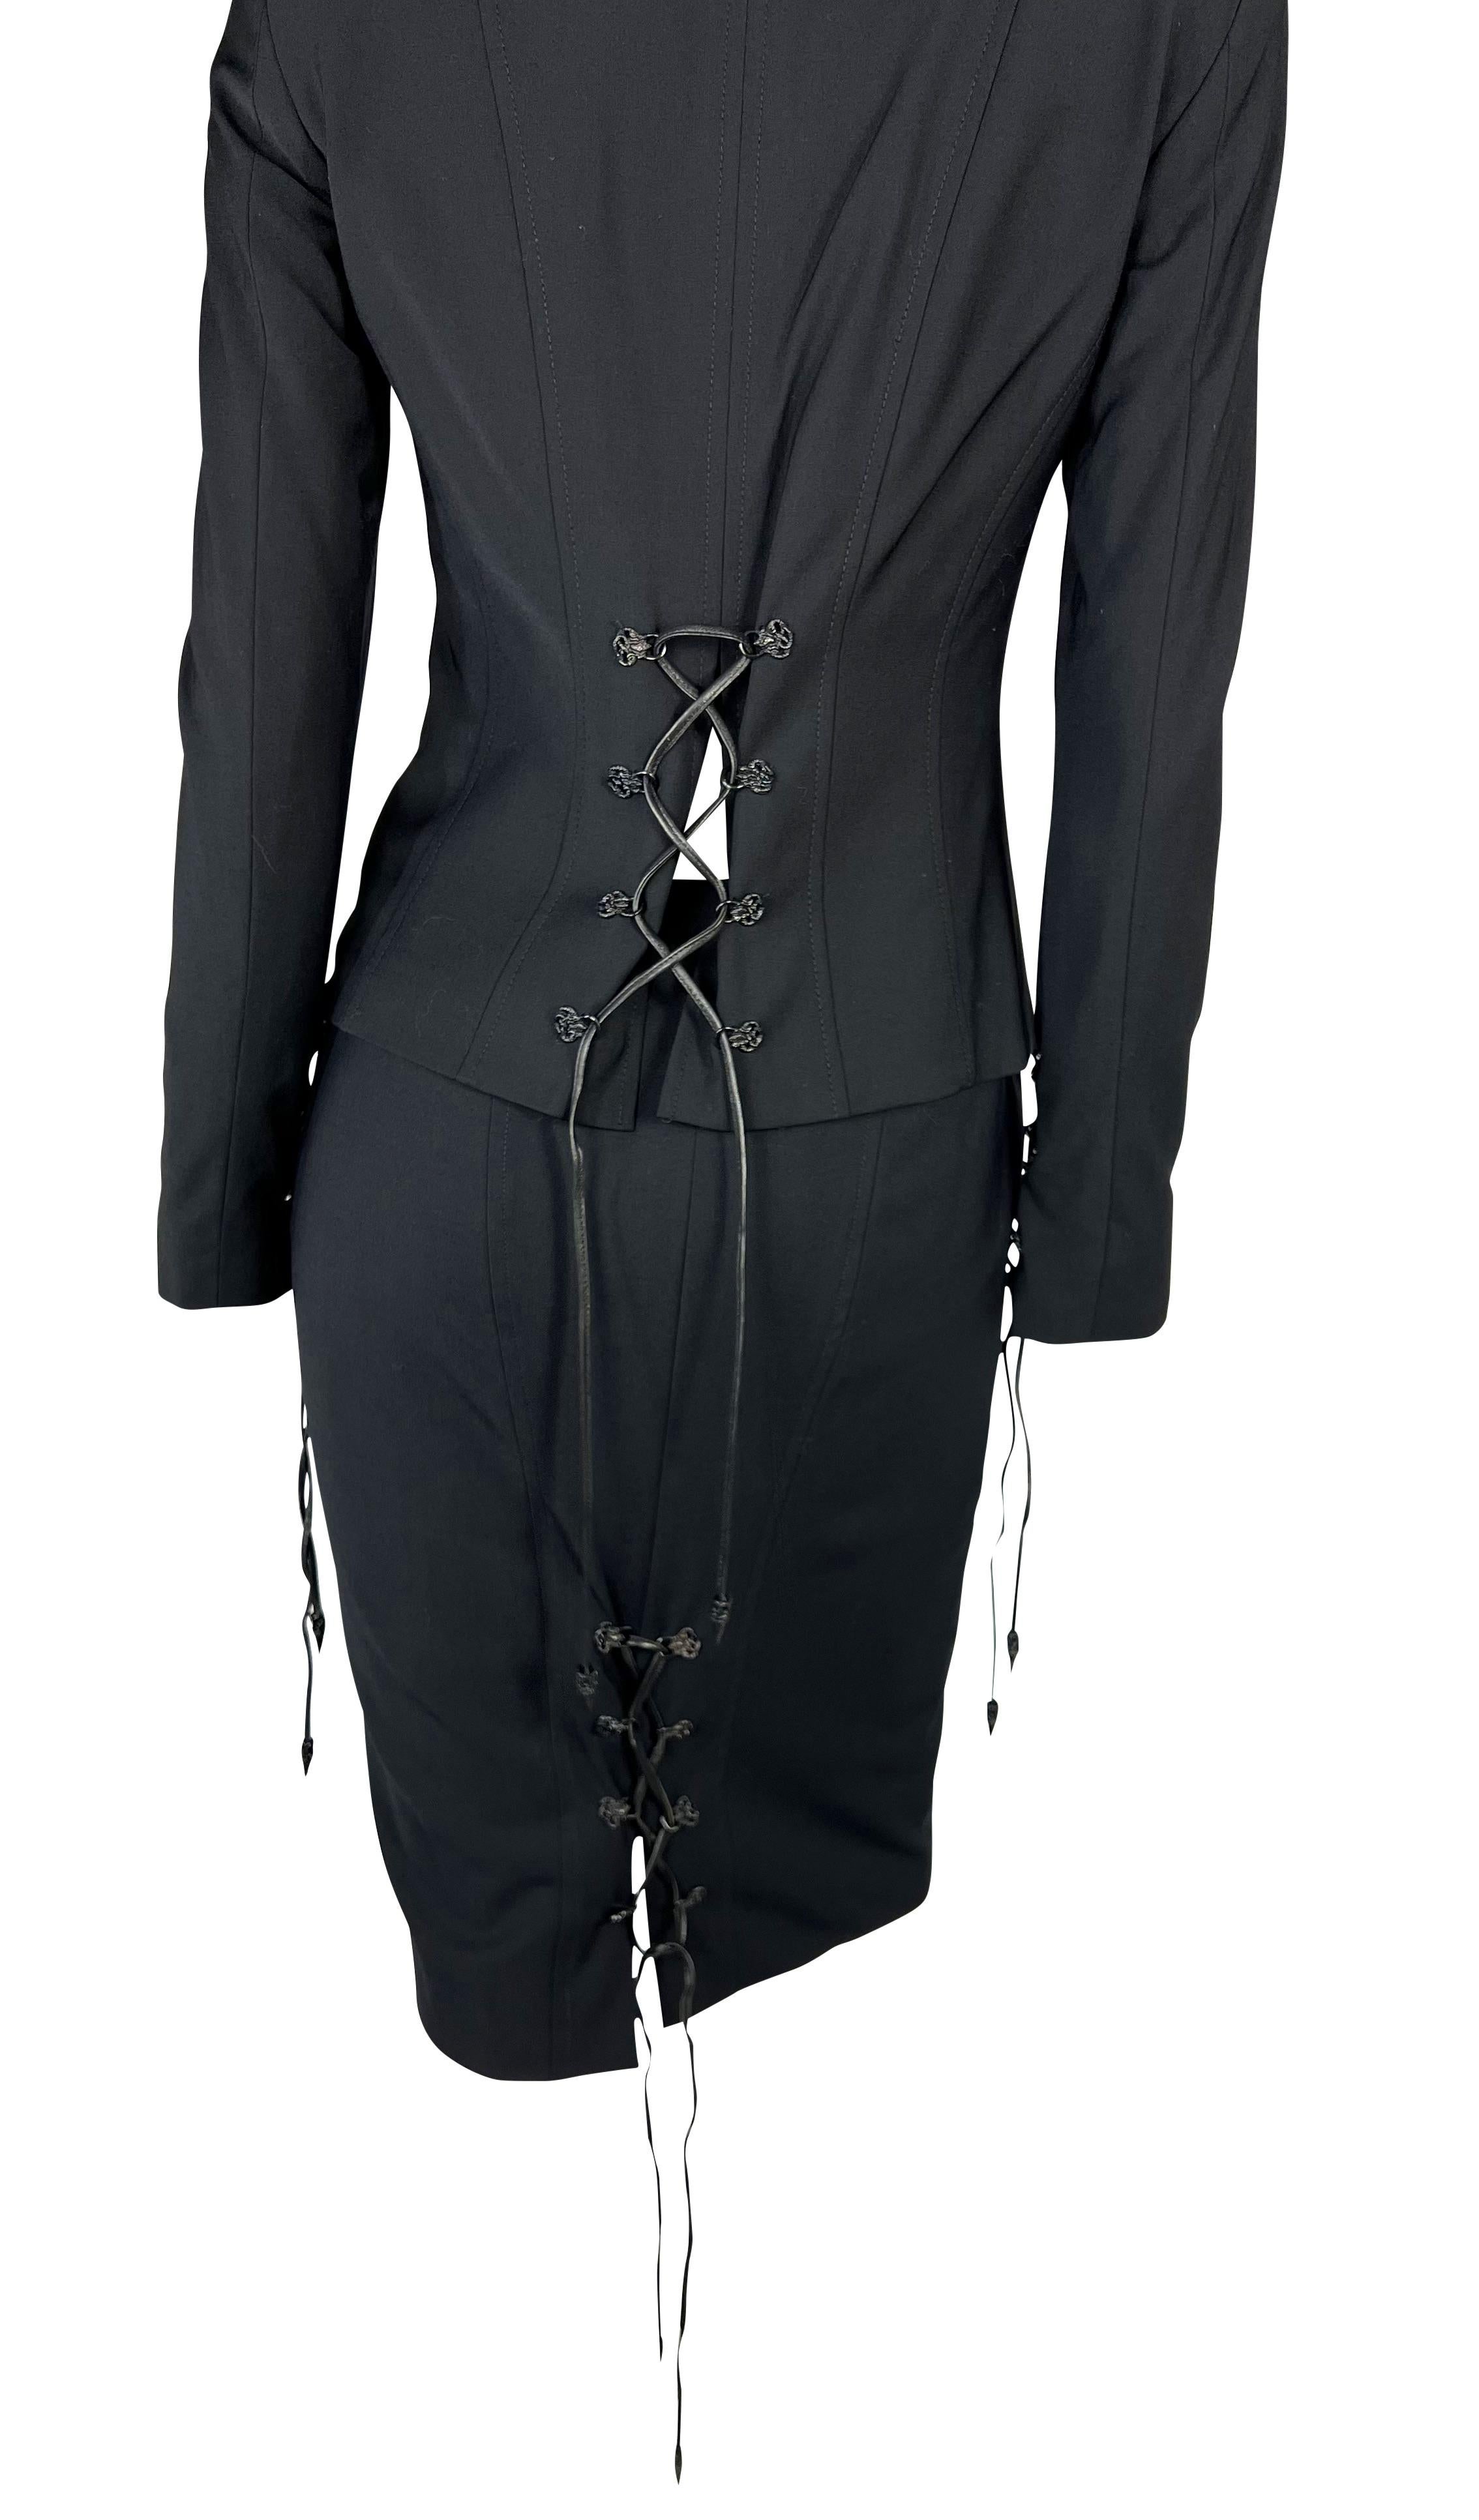 Presenting an incredible black lace-up accented Versace skirt suit set, designed by Donatella Versace. From the Fall/Winter 2003 collection, this fabulous skirt set consists of a black zip-up jacket and matching skirt. The jacket features a deep